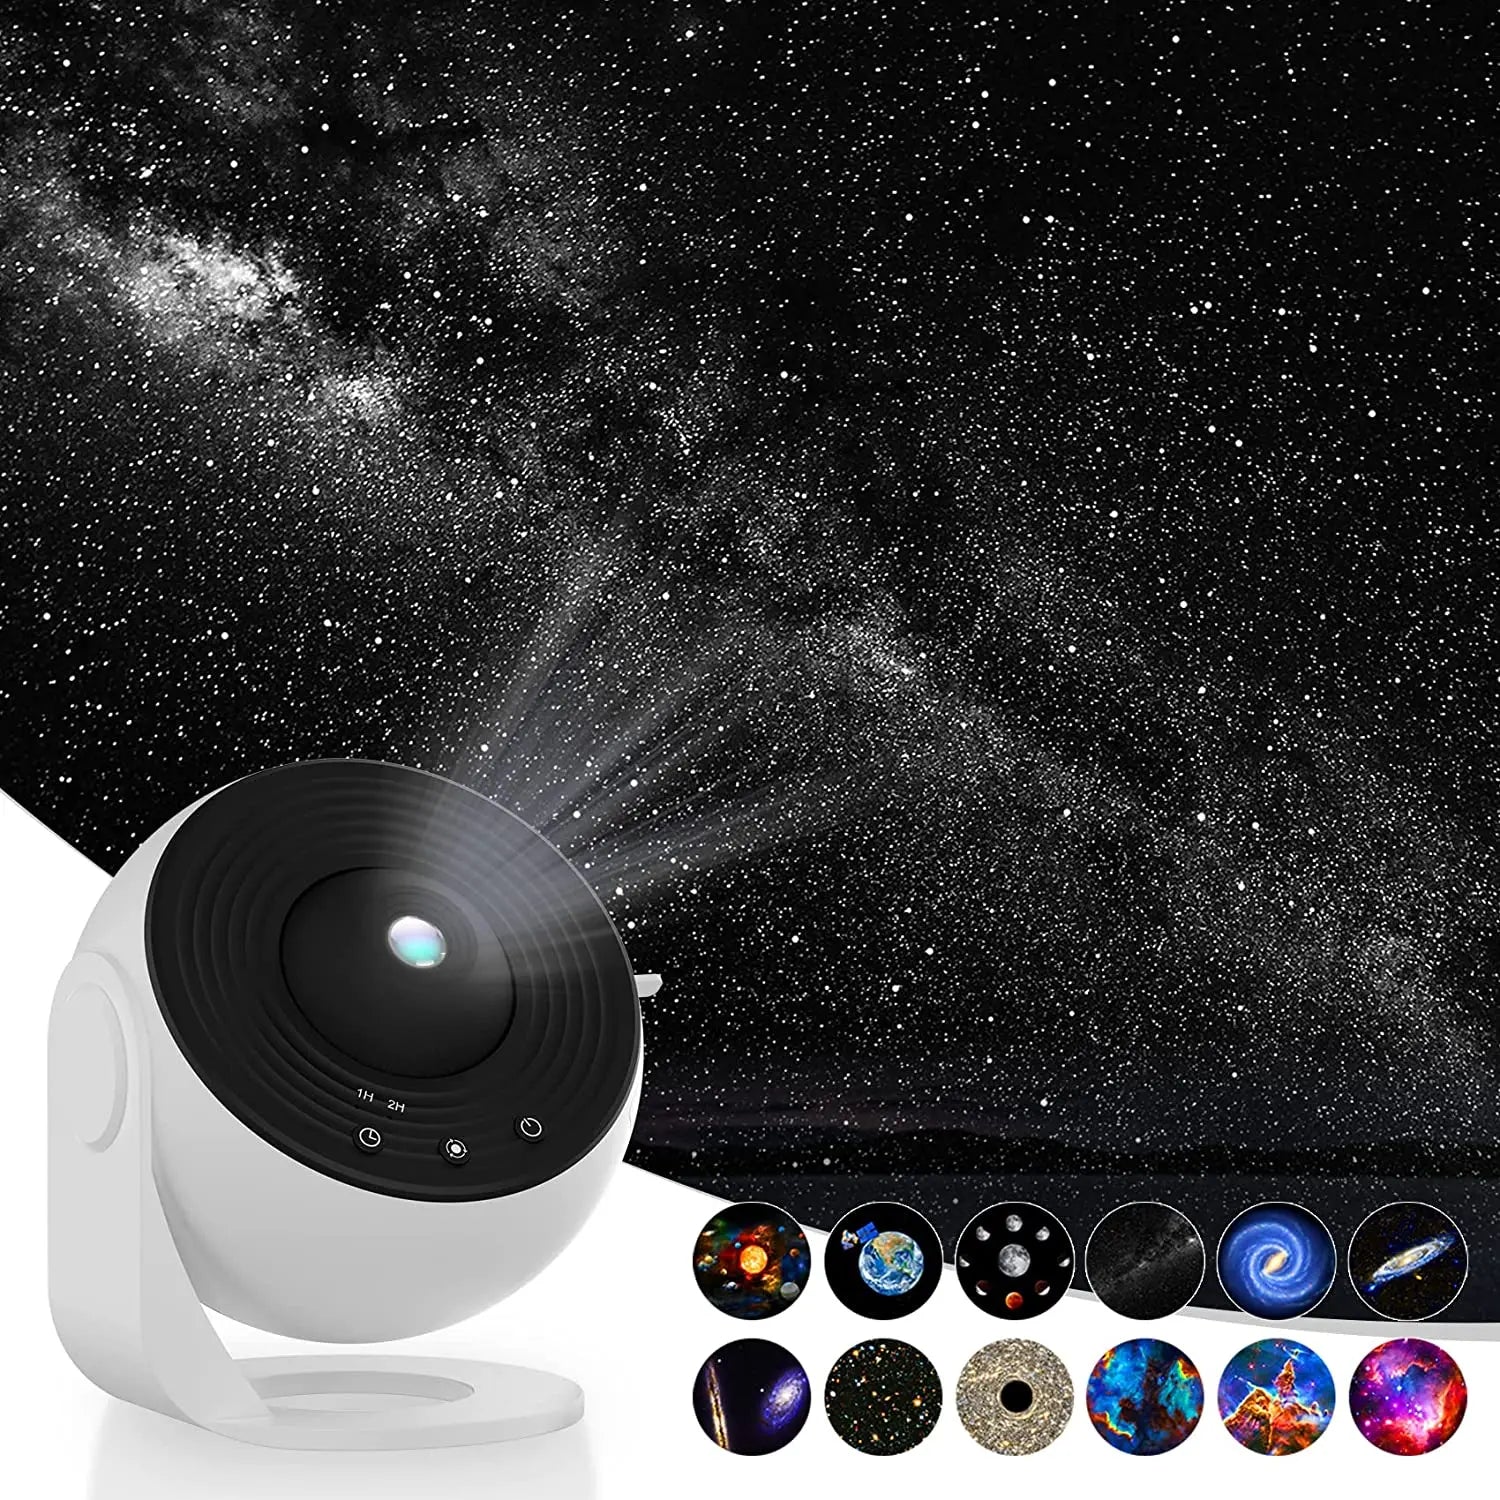 8 in 1 Planetarium Star Projector 360° Adjustable Galaxy Projector Night  Light Planets LED Lamp for Kids Gift Bedroom Home Decor